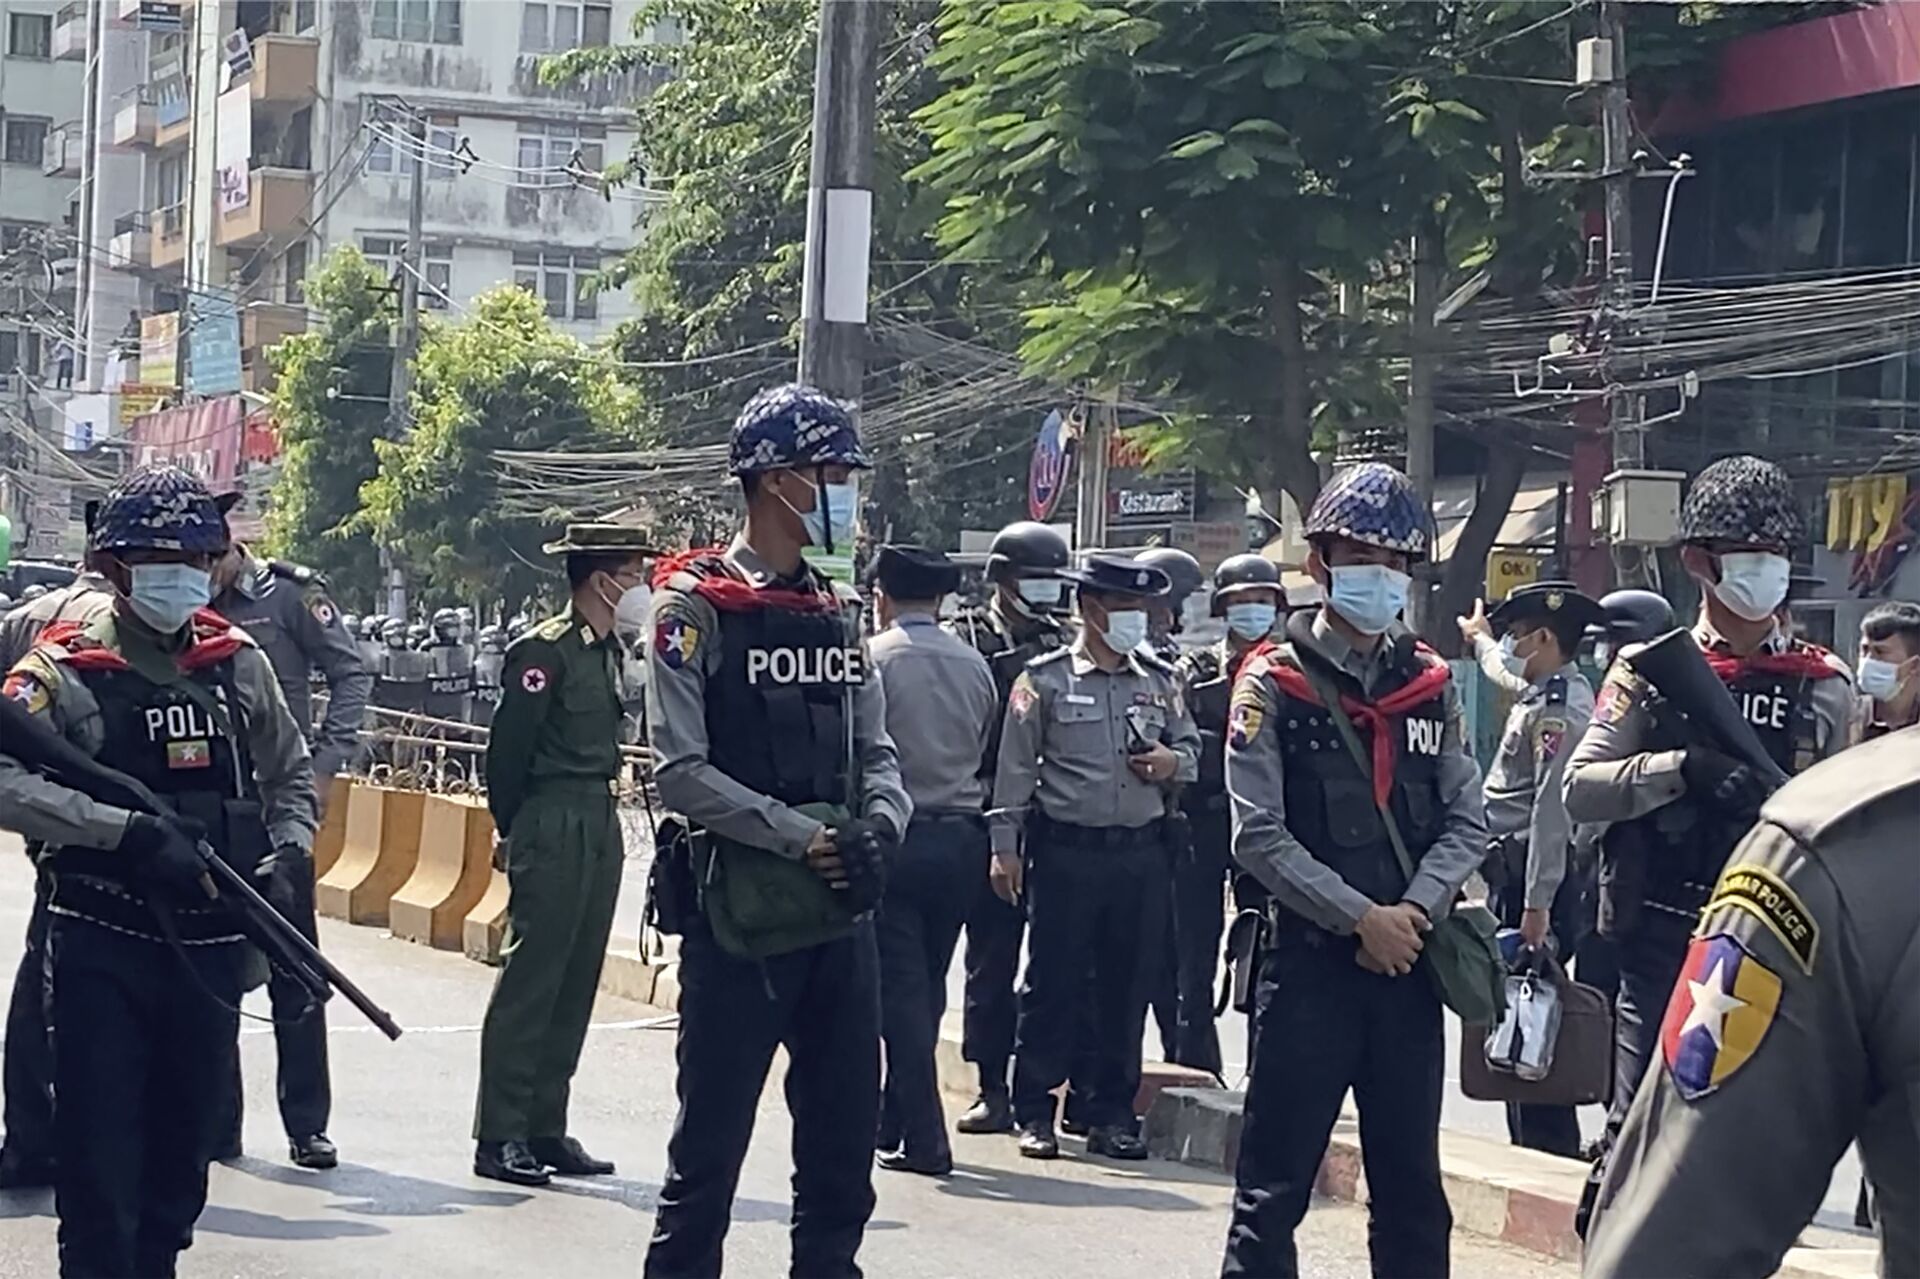 Military Deployed to Yangon's Streets as Myanmar Protests Enter 4th Day, Reports Suggest  - Sputnik International, 1920, 09.02.2021